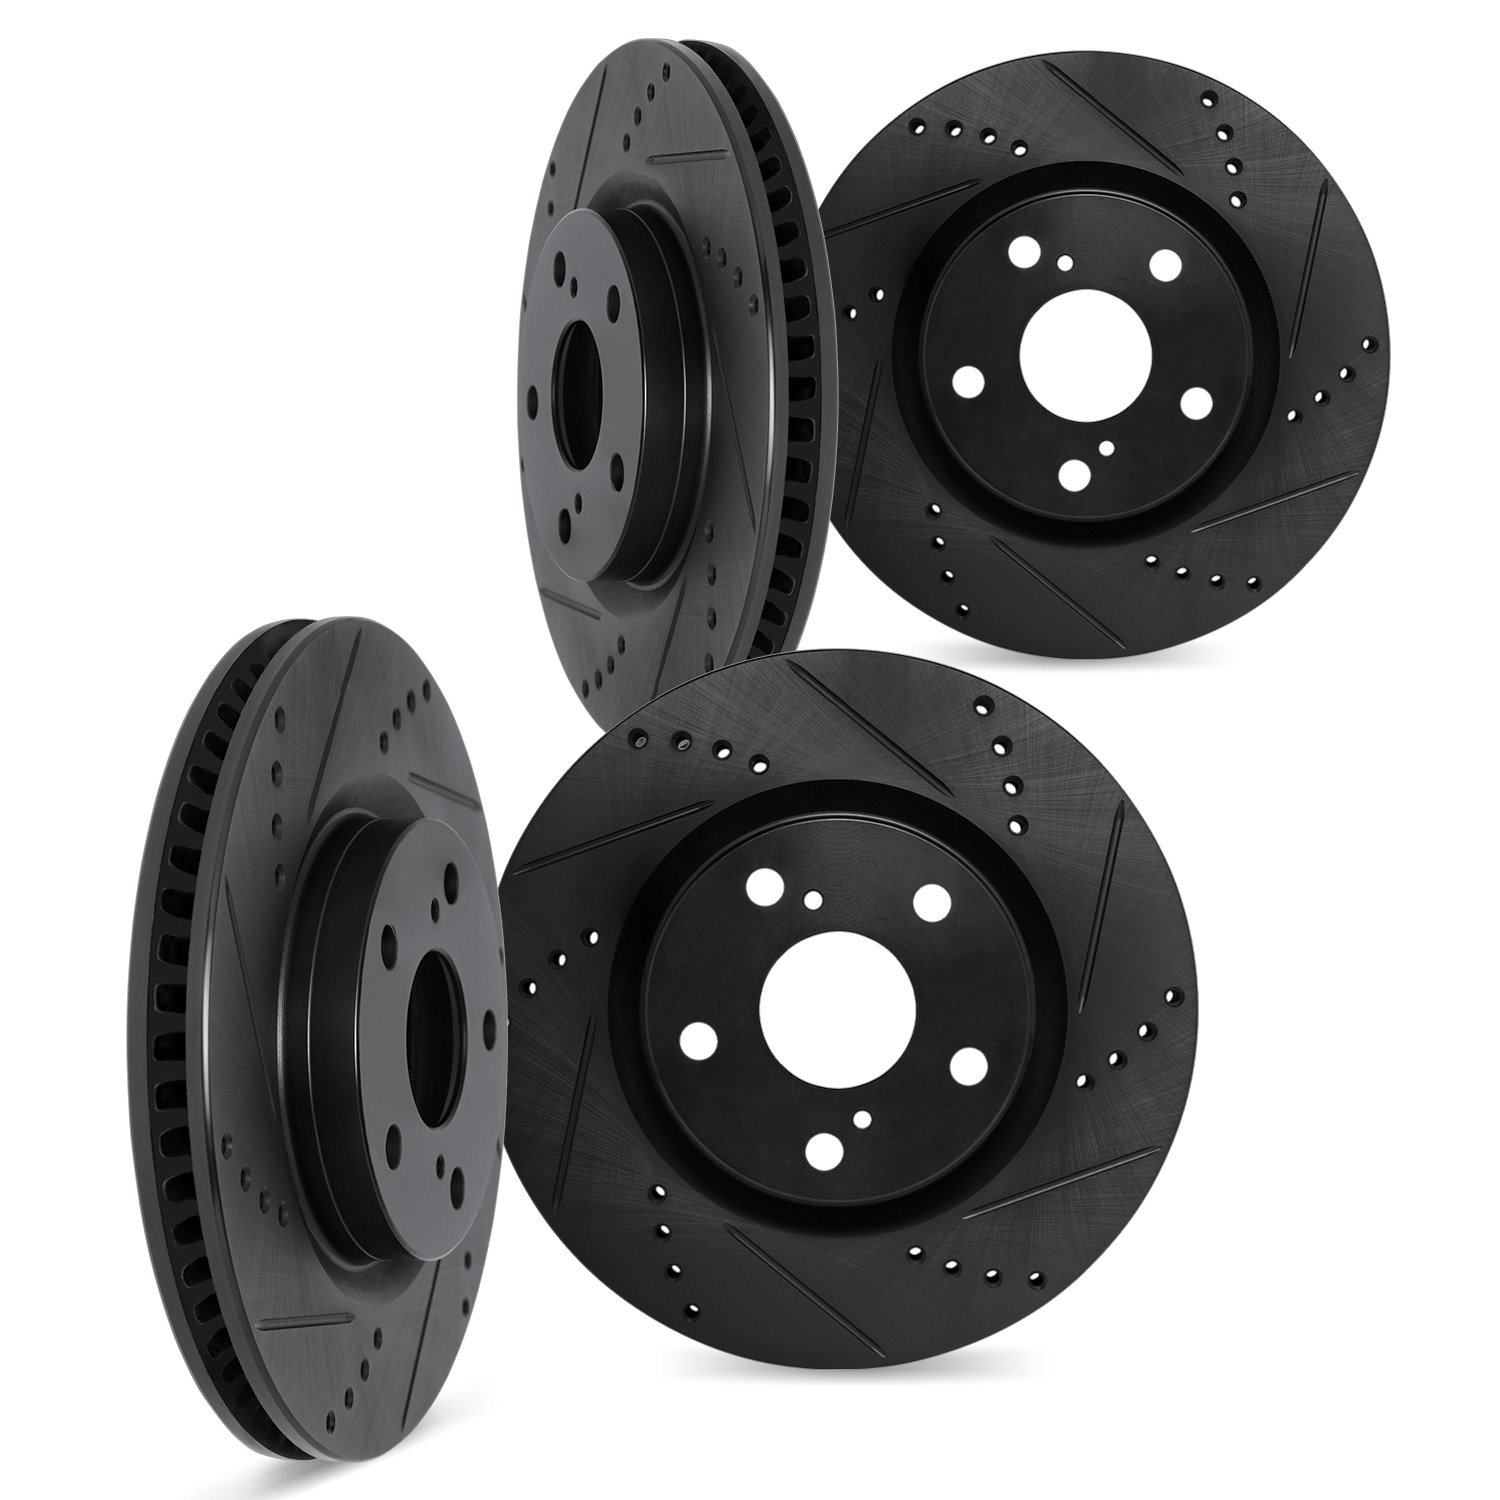 8004-02002 Drilled/Slotted Brake Rotors [Black], 1984-1989 Porsche, Position: Front and Rear